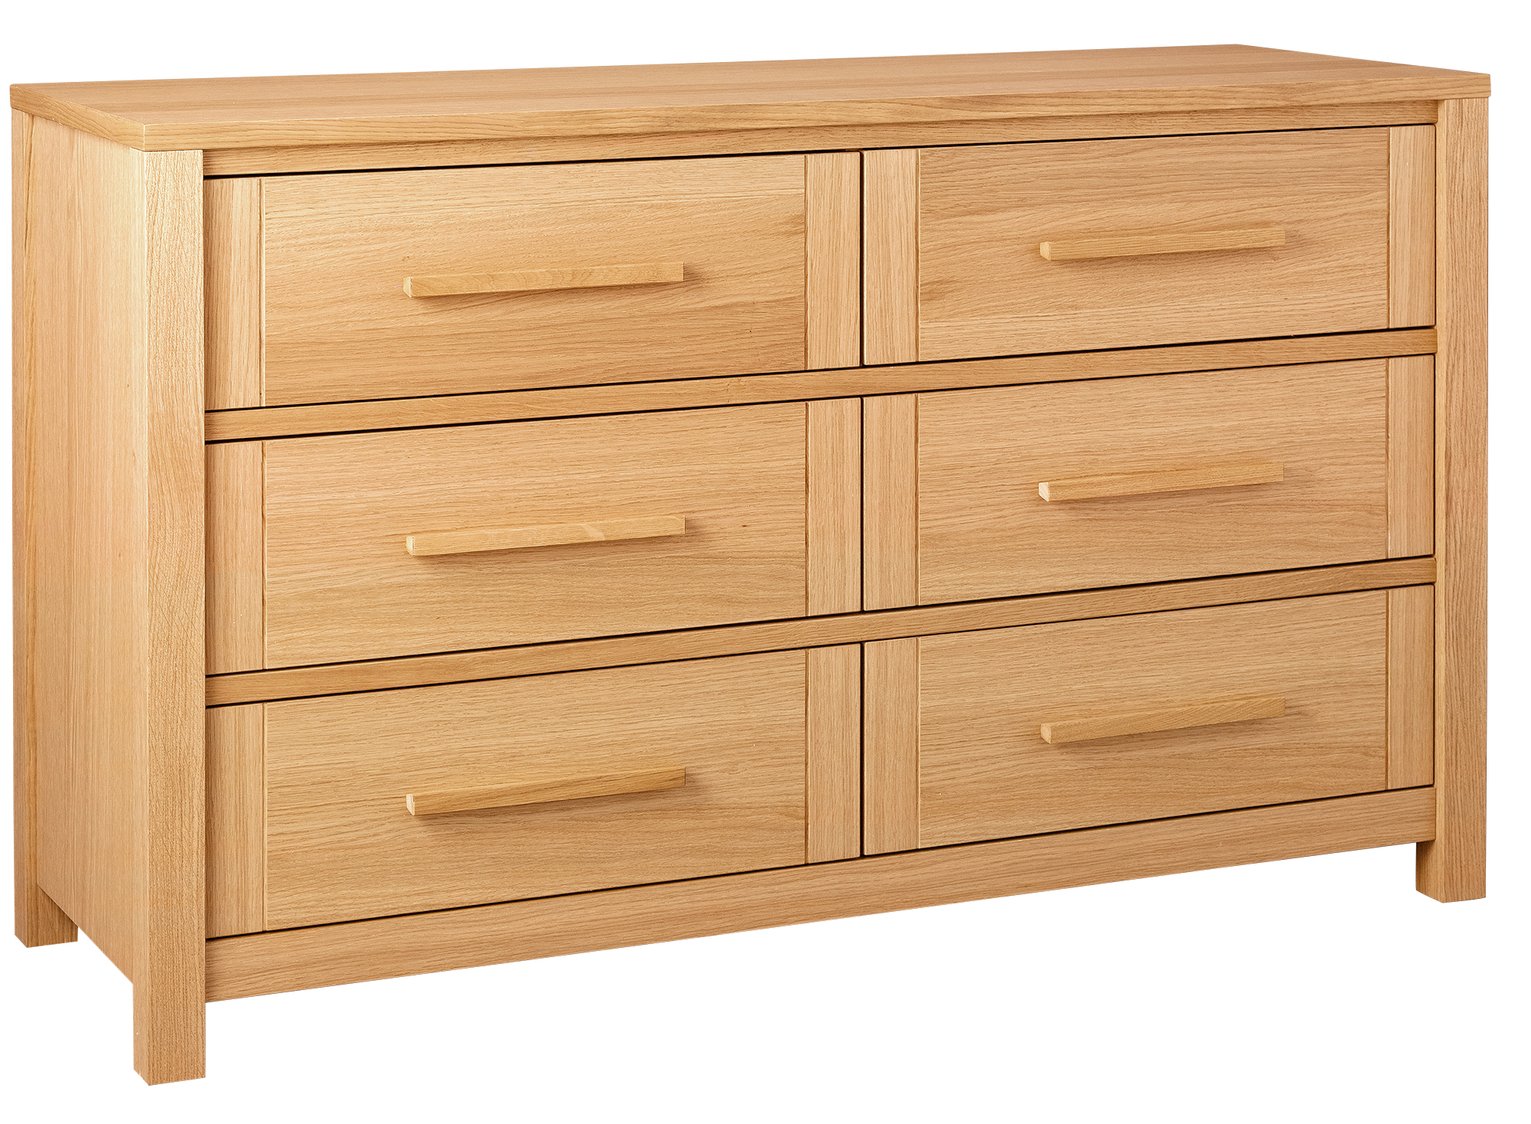 Arch White 3Drawer Chest + Reviews Crate and Barrel 3